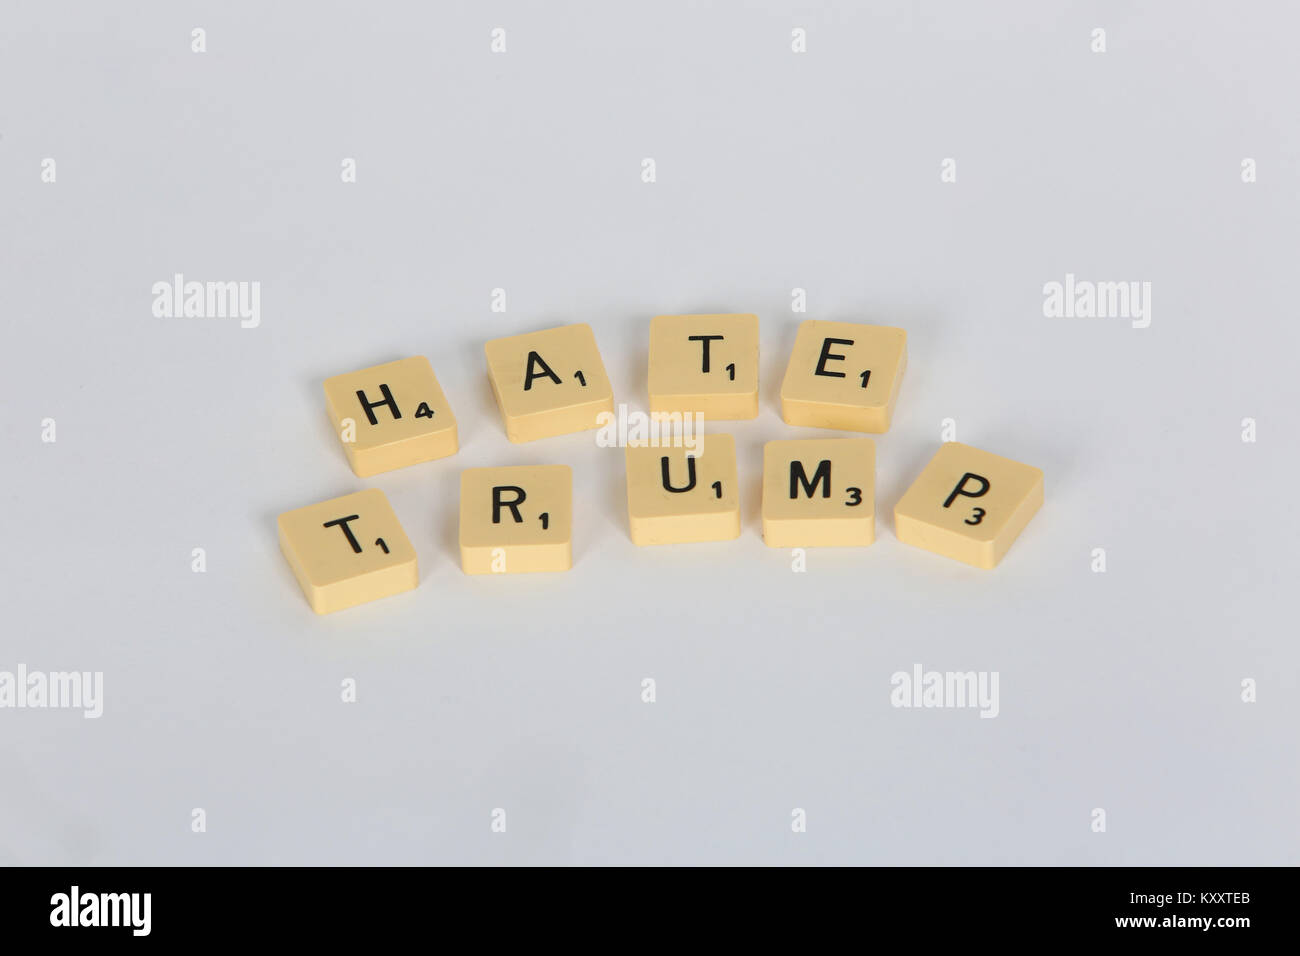 Old Scrabble letters spelling out 'Love Trump' and 'Hate Trump' on a white background, London, UK. Stock Photo